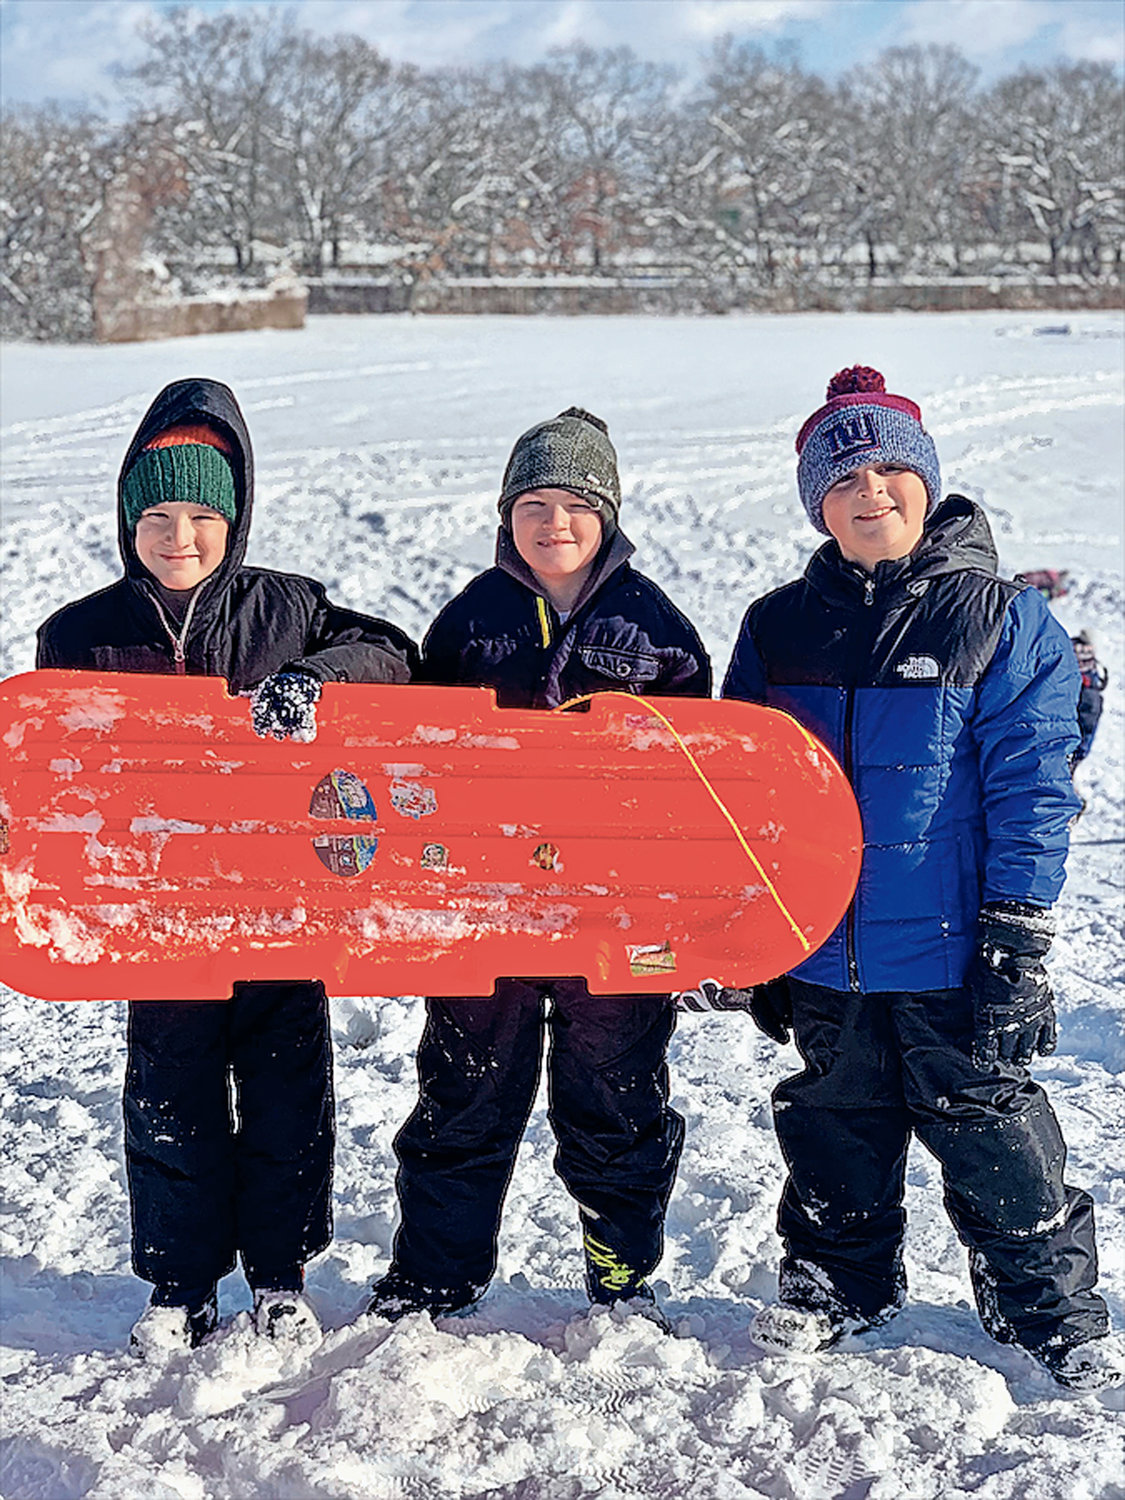 From left, Xavier David, Maceo Barry and Nicholas Vecchiano enjoyed sledding during a snow day in January.